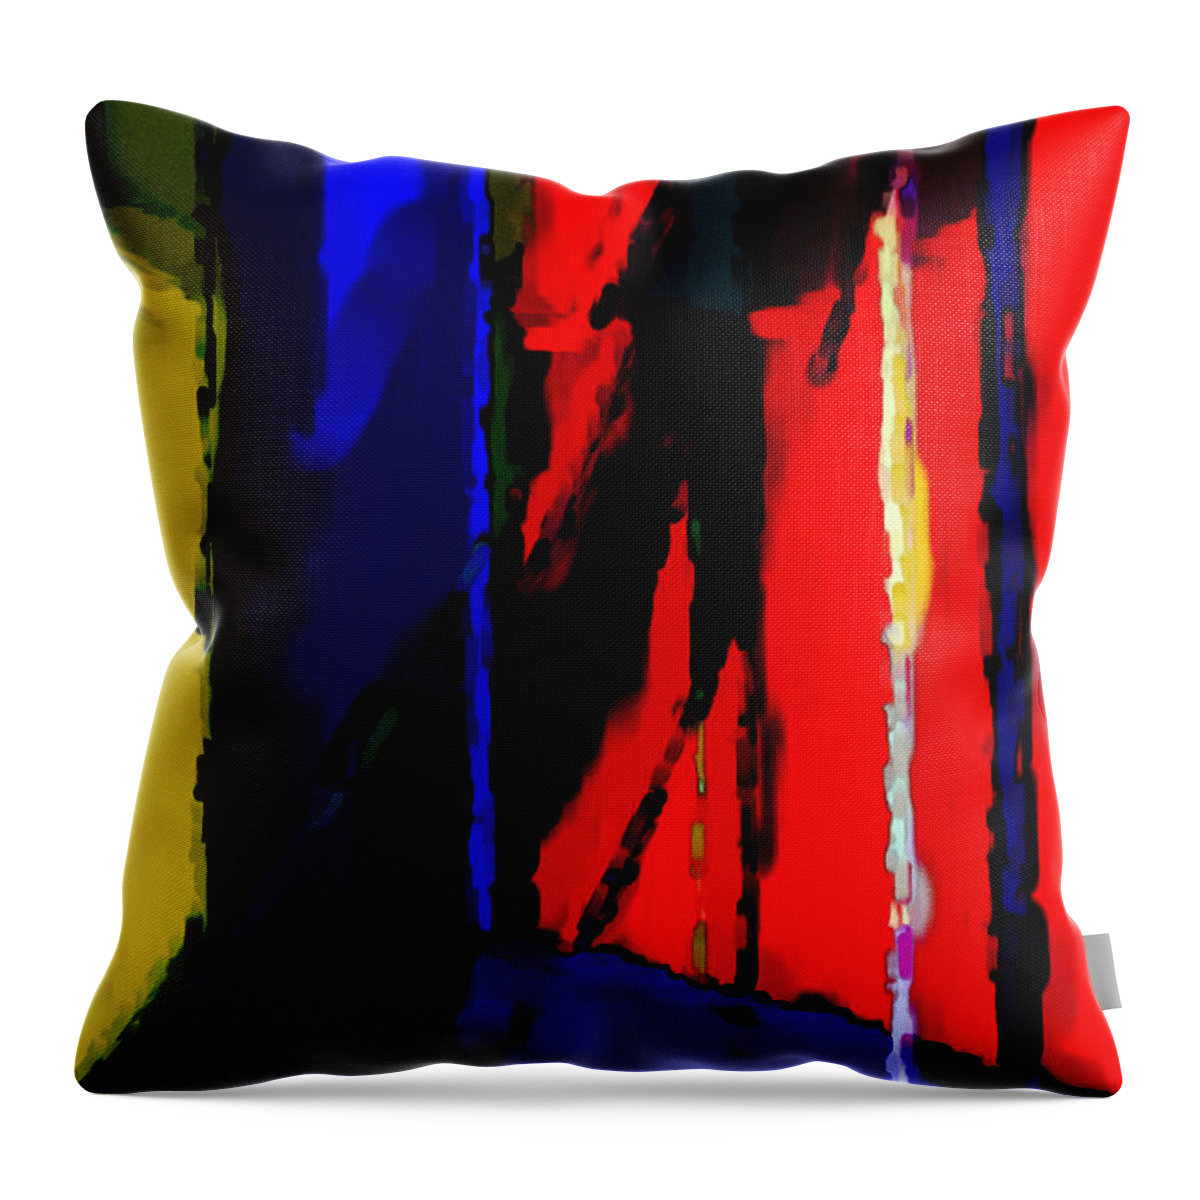 Torment Throw Pillow featuring the digital art Torment by Richard Rizzo